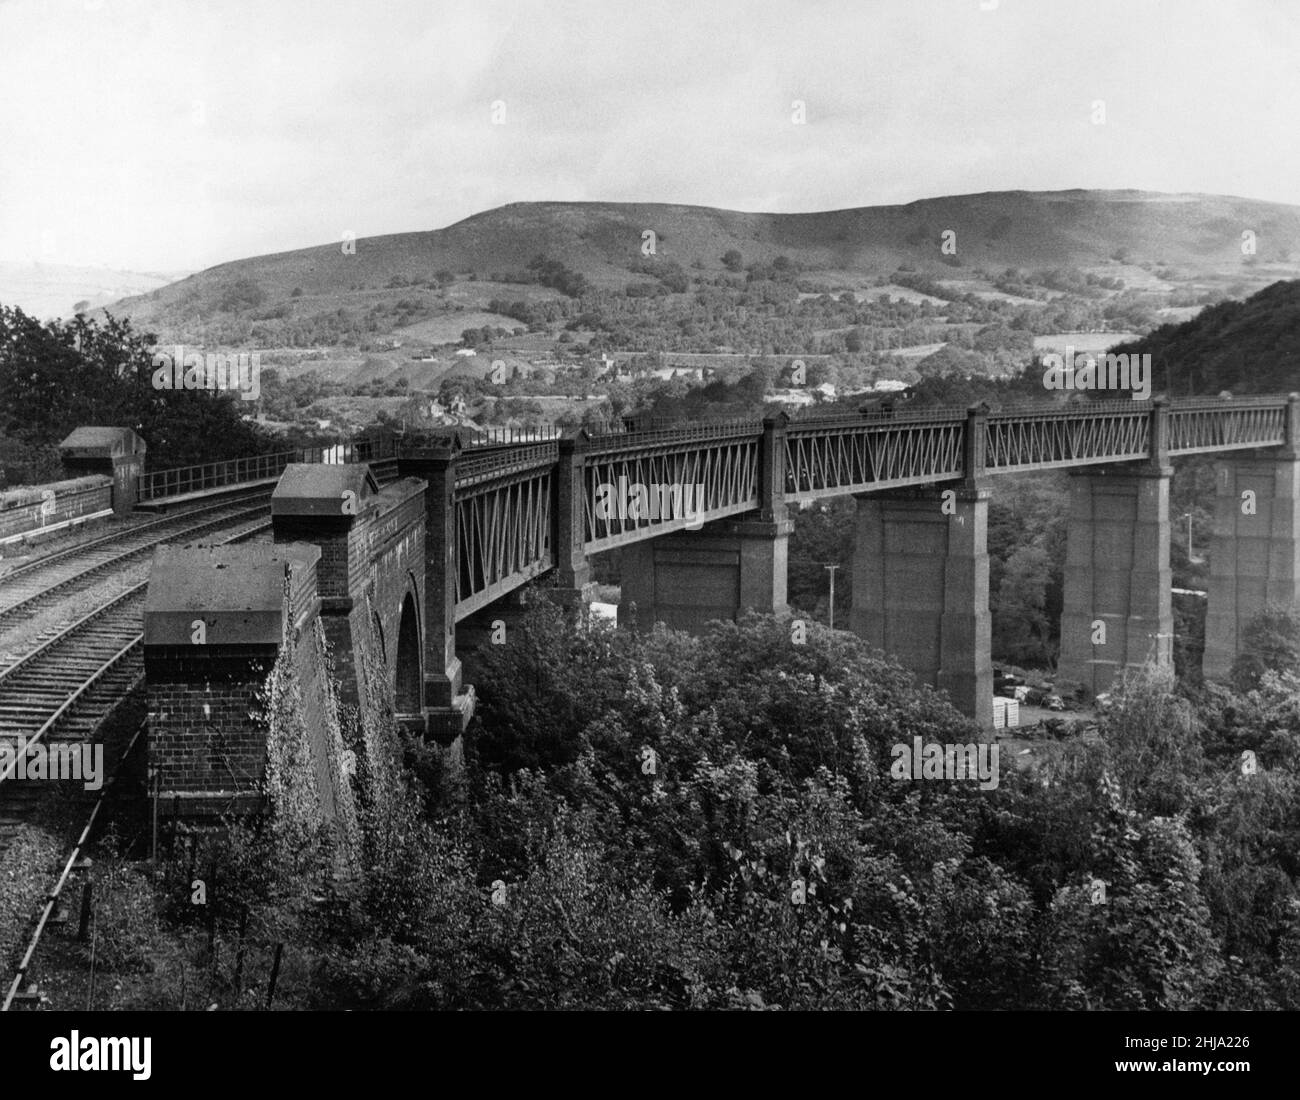 Walnut Tree Viaduct, a railway viaduct located above the southern edge of the village of Taffs Well, Cardiff, South Wales, September 1963. Made of Brick columns and Steel lattice girders spans. Stock Photo